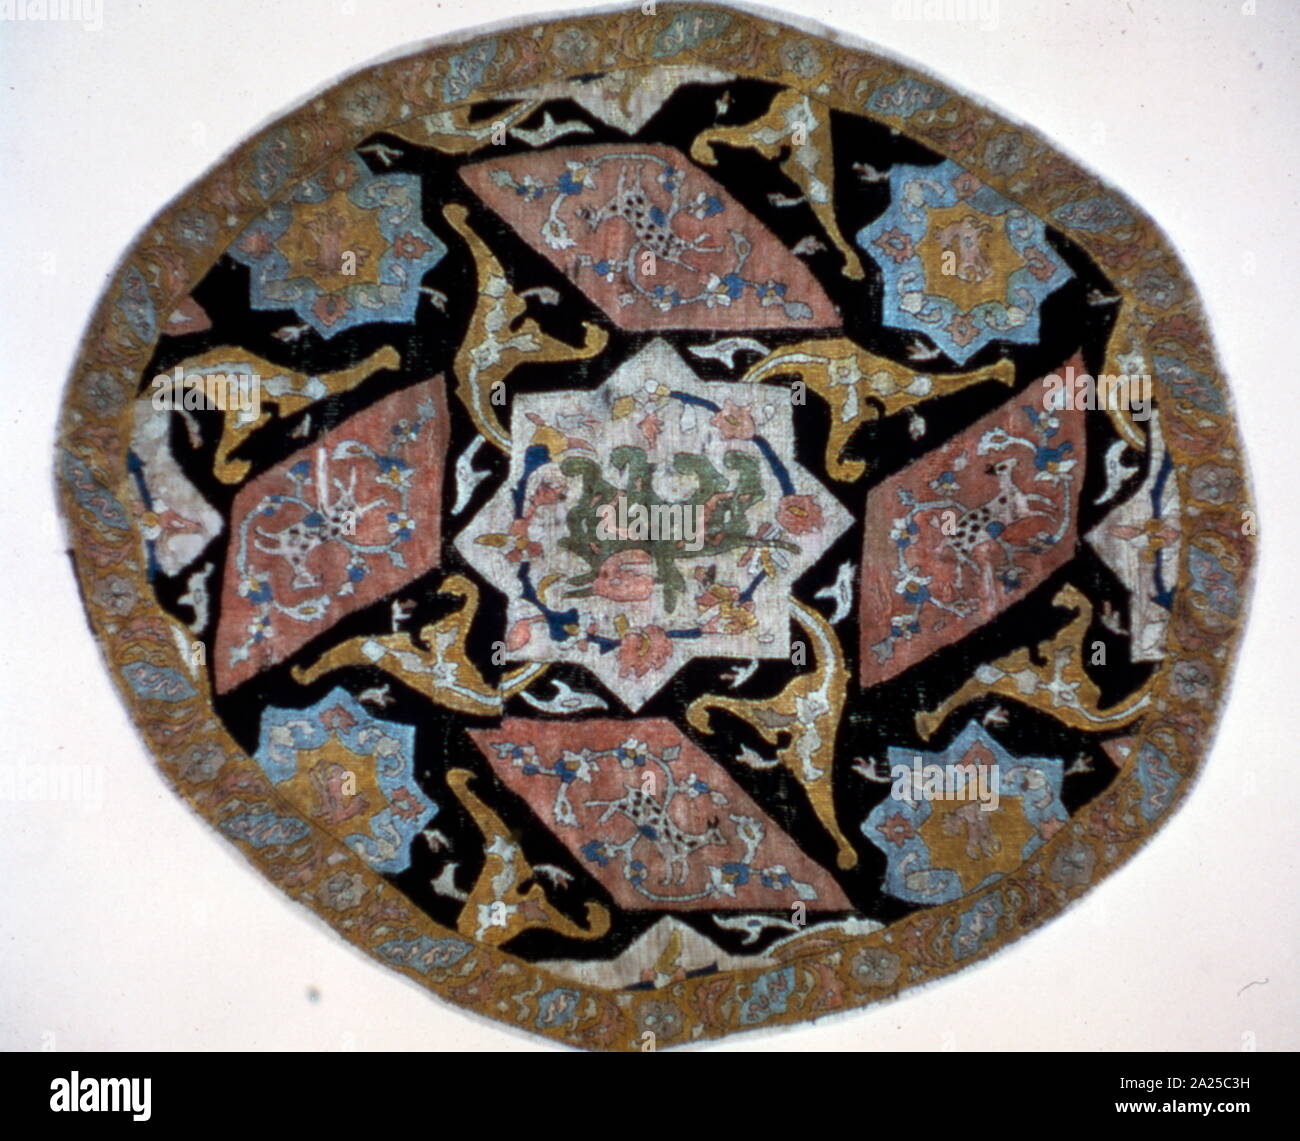 Safavid, Persian table cloth with traditional Islamic patterns, 17th Century, Iran Stock Photo